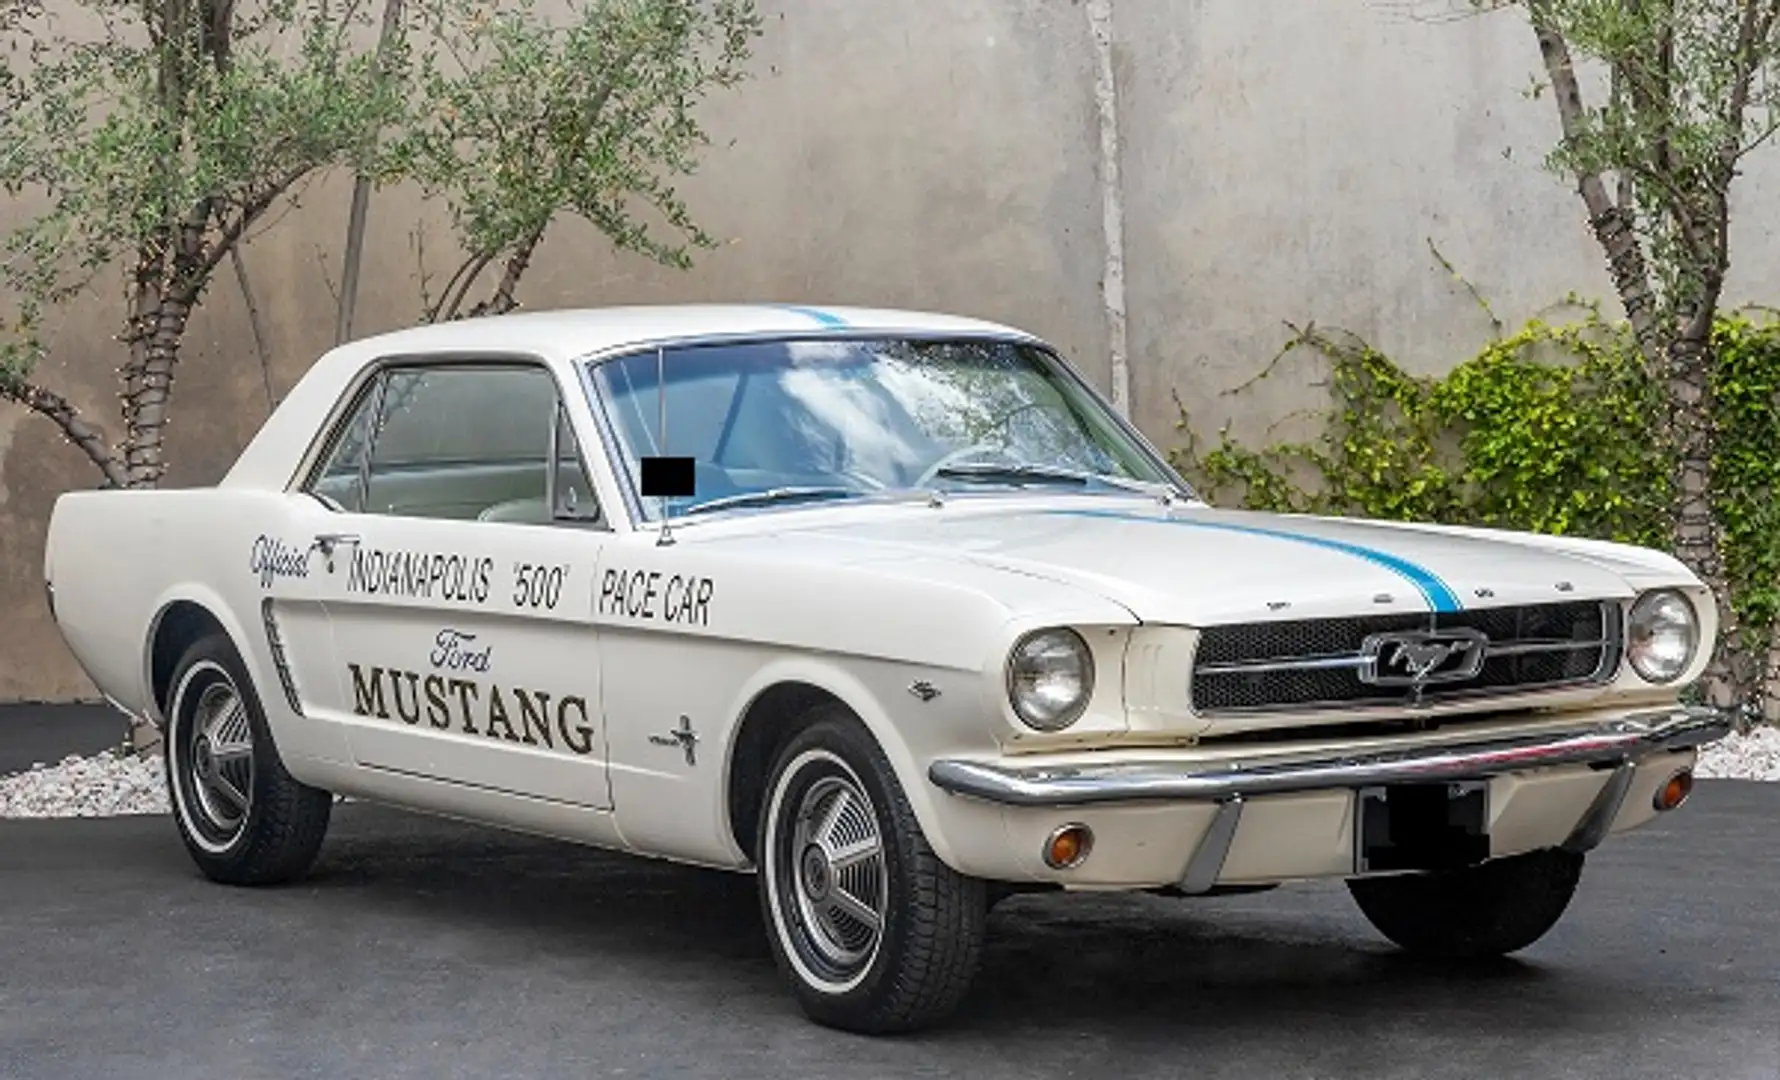 Ford Mustang Indy 500 Pace Car - 1